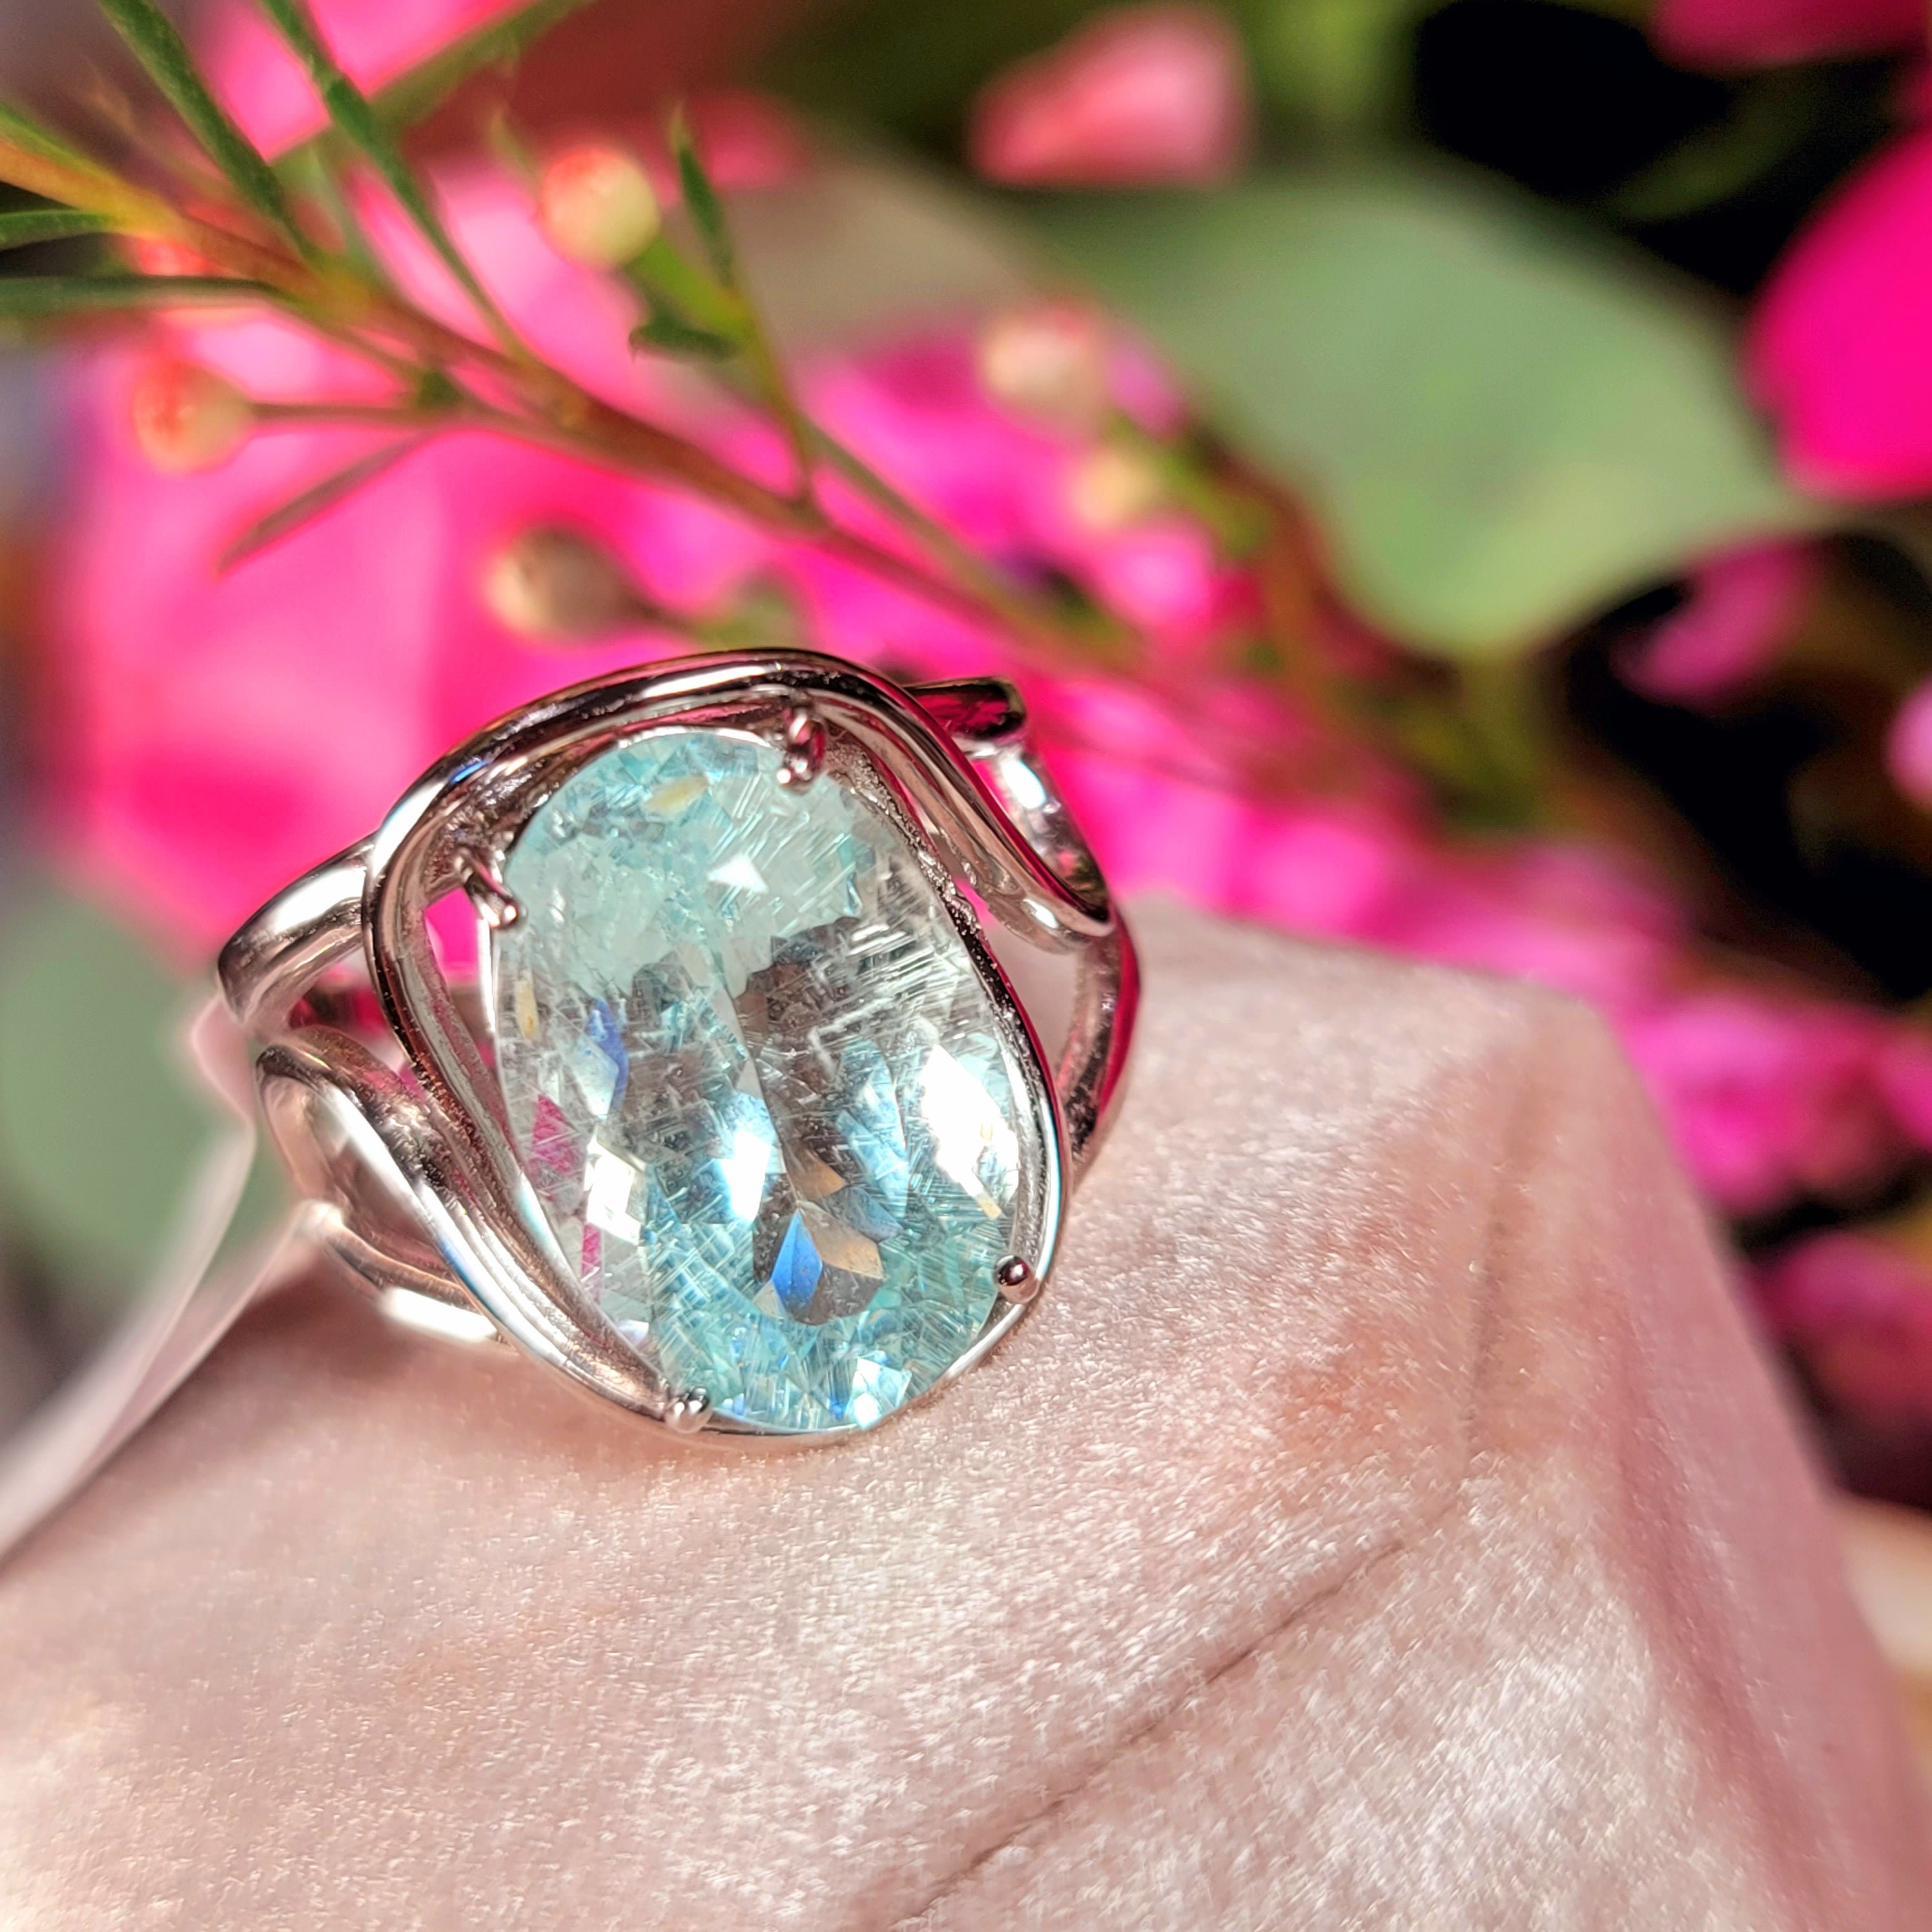 Aquamarine & Rutile Finger Cuff Adjustable Ring .925 Silver for Improved Communication and Peace